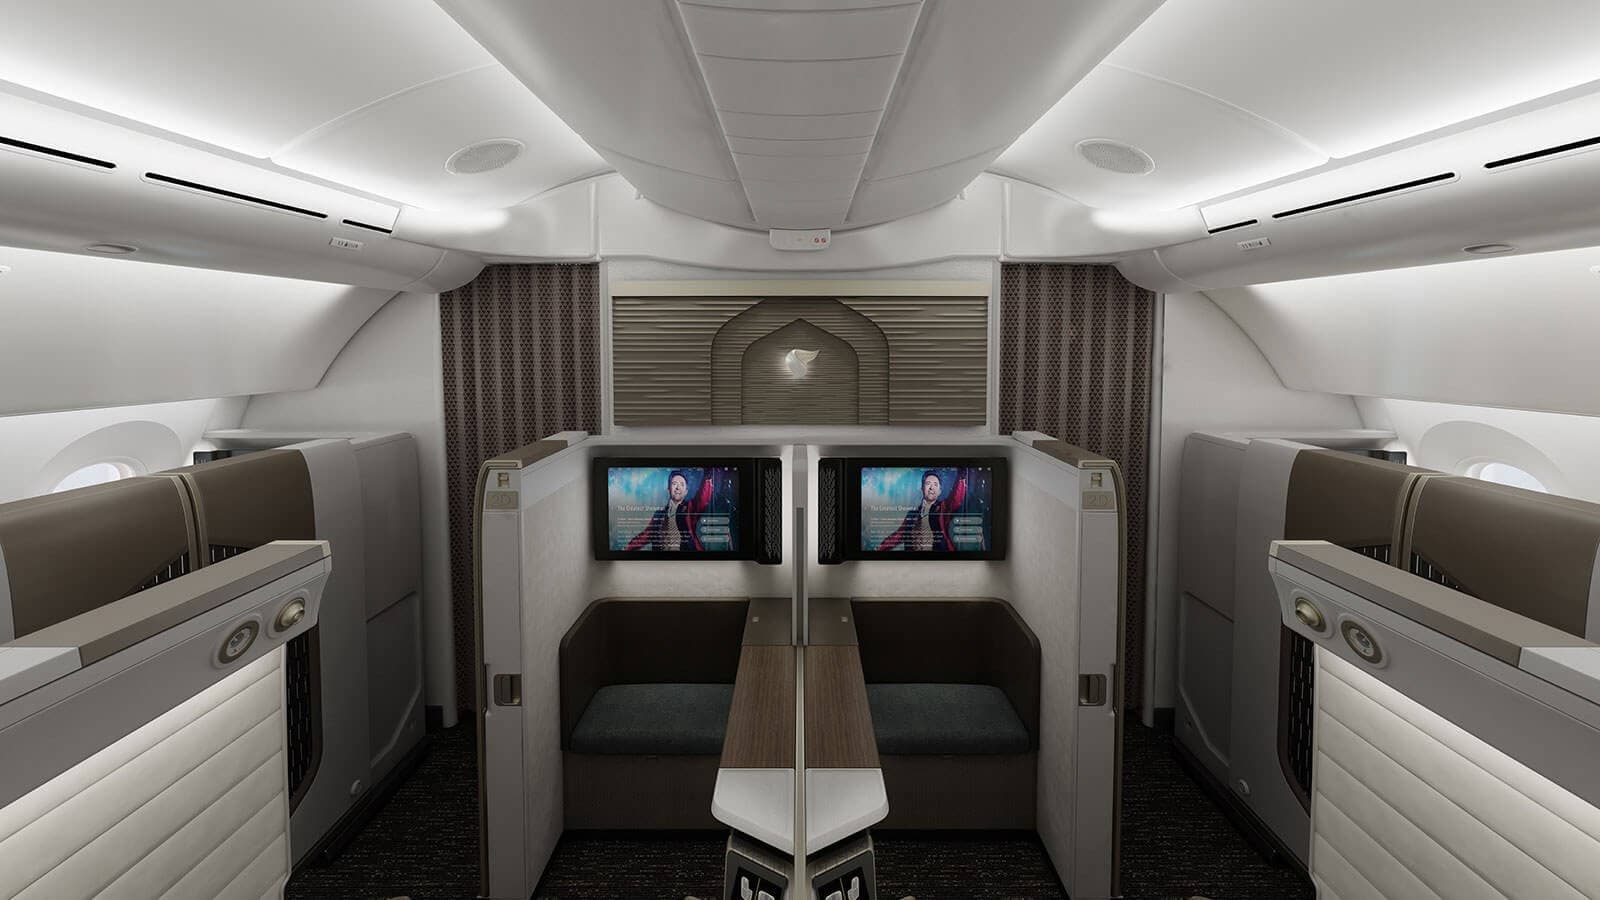 Oman Air brightly lit First Class Cabin with lit bulkhead feature